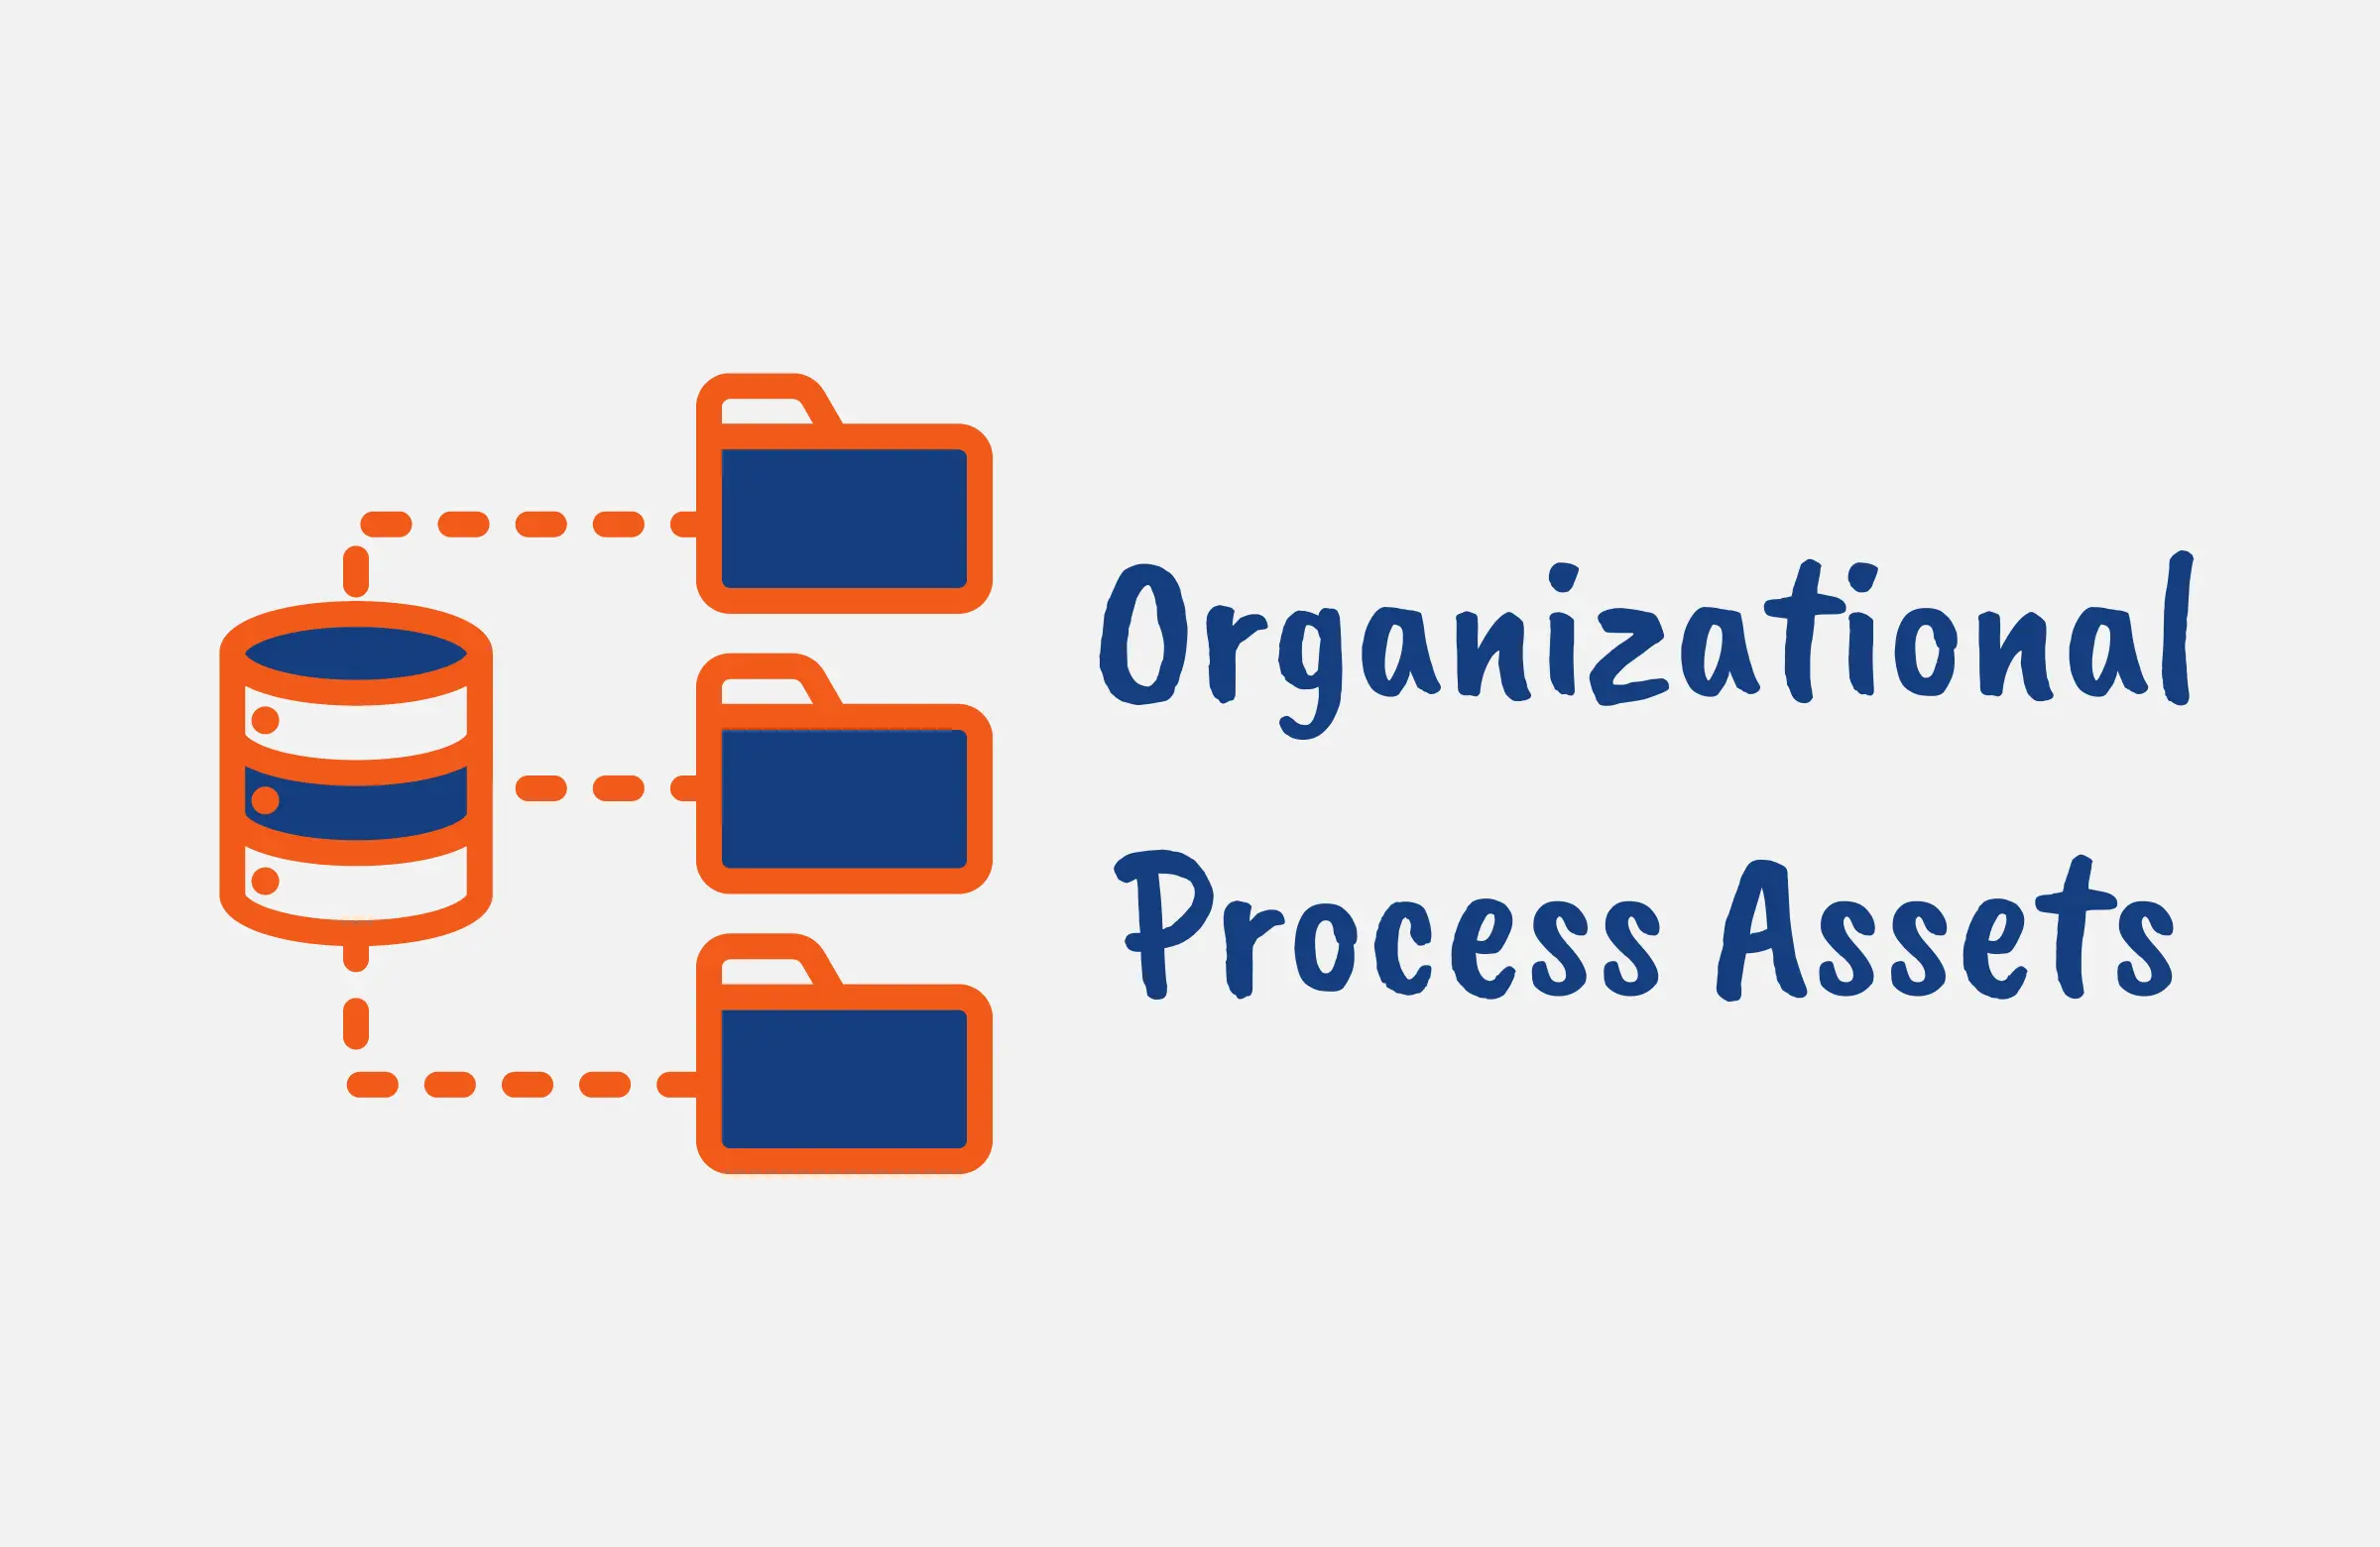 What are Organizational Process Assets (OPAs)